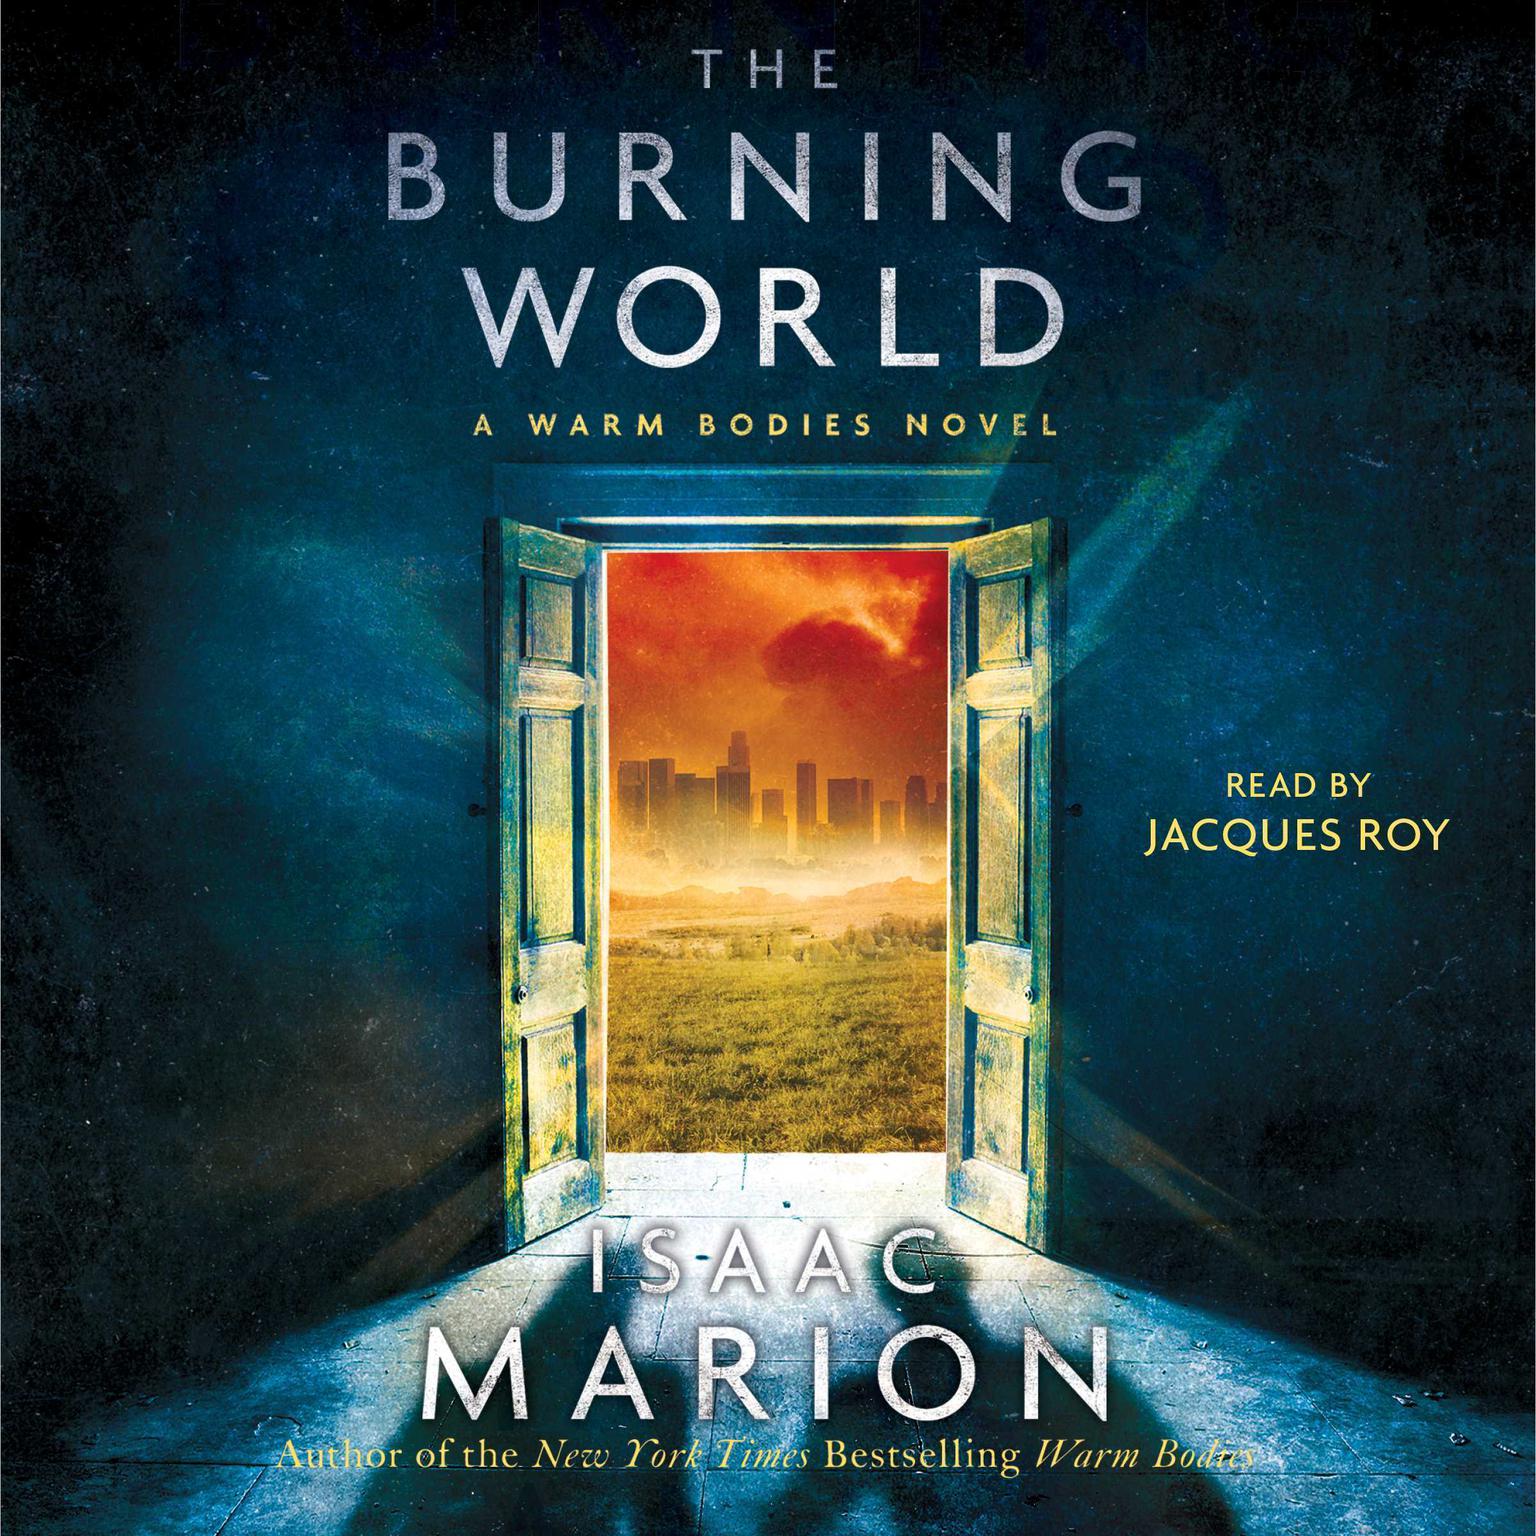 The Burning World: A Warm Bodies Novel Audiobook, by Isaac Marion